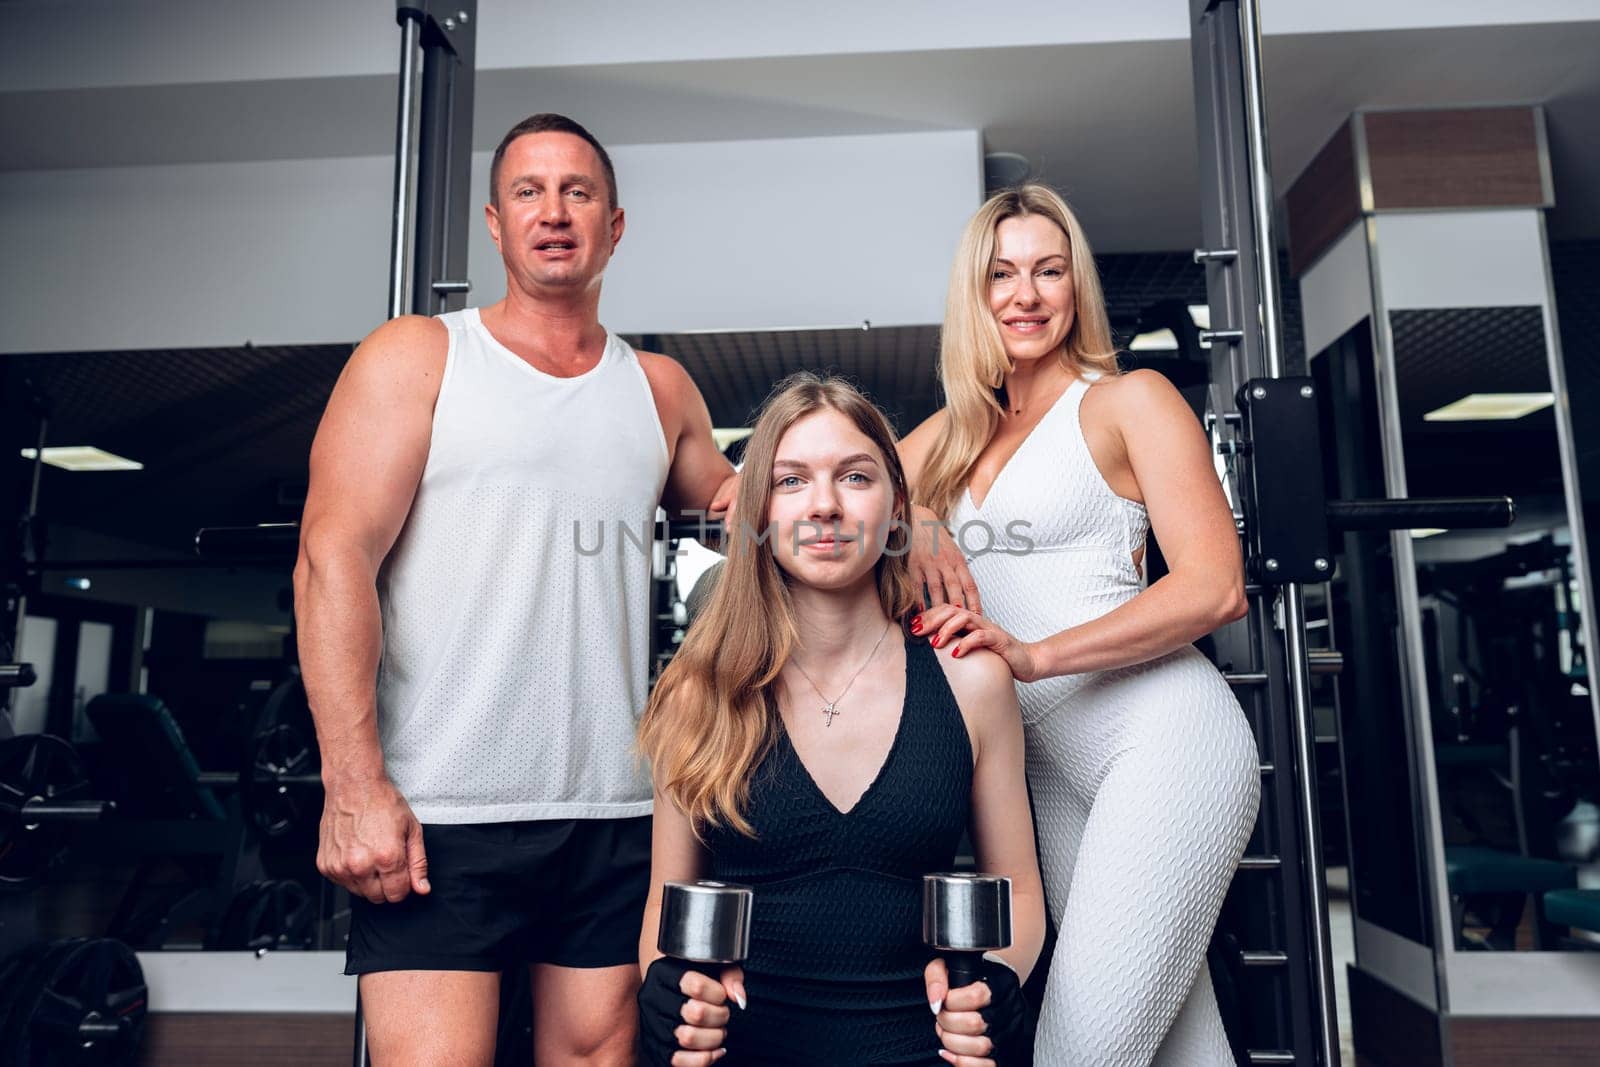 Mother, father and teen daughter training together in a gym, portrait